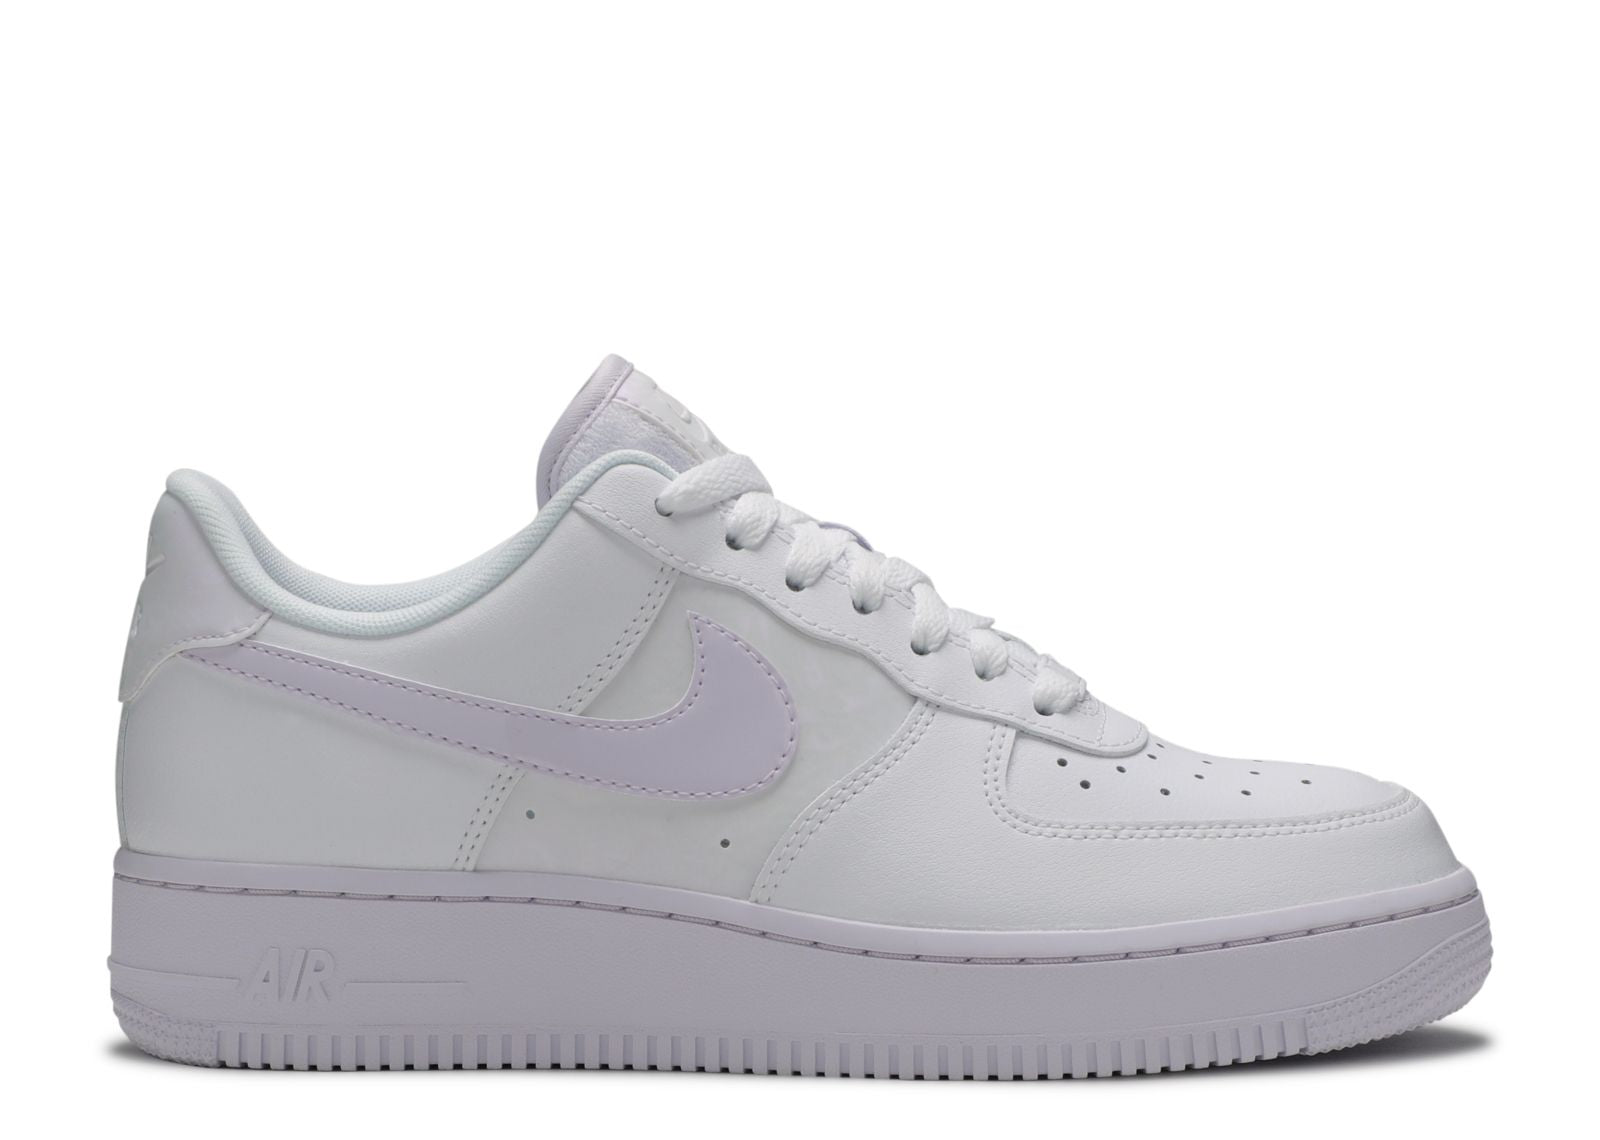 Second Chance - Nike Air Force 1 Low White Barely Grape (W) - 36 | NEW